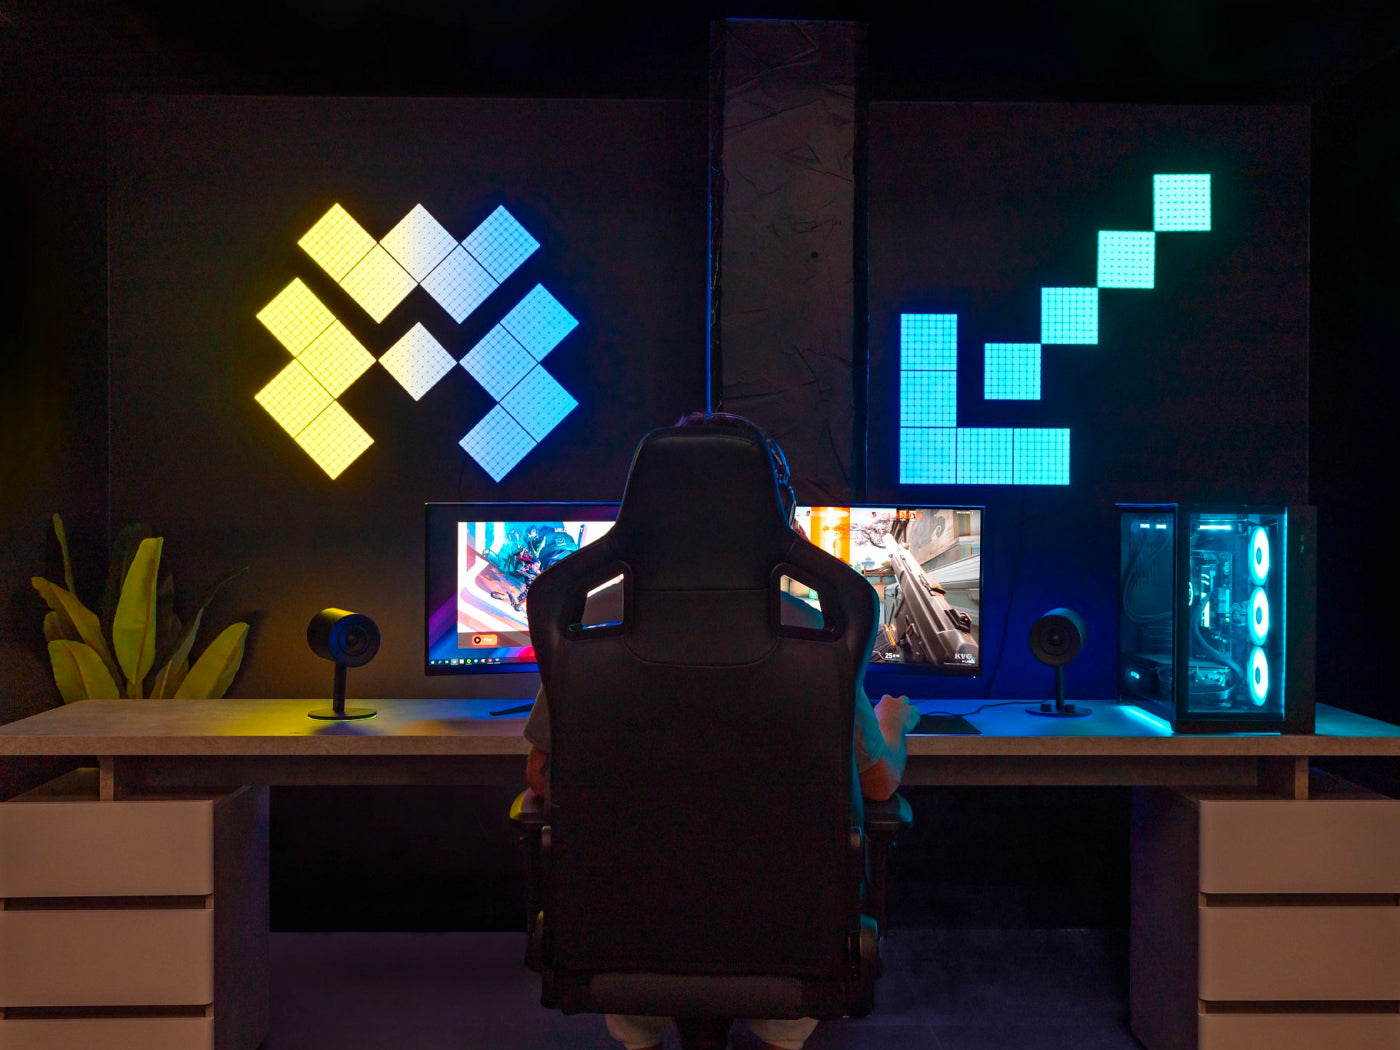 Best smart lights for your gaming room: Twinkly Squares vs. Flex